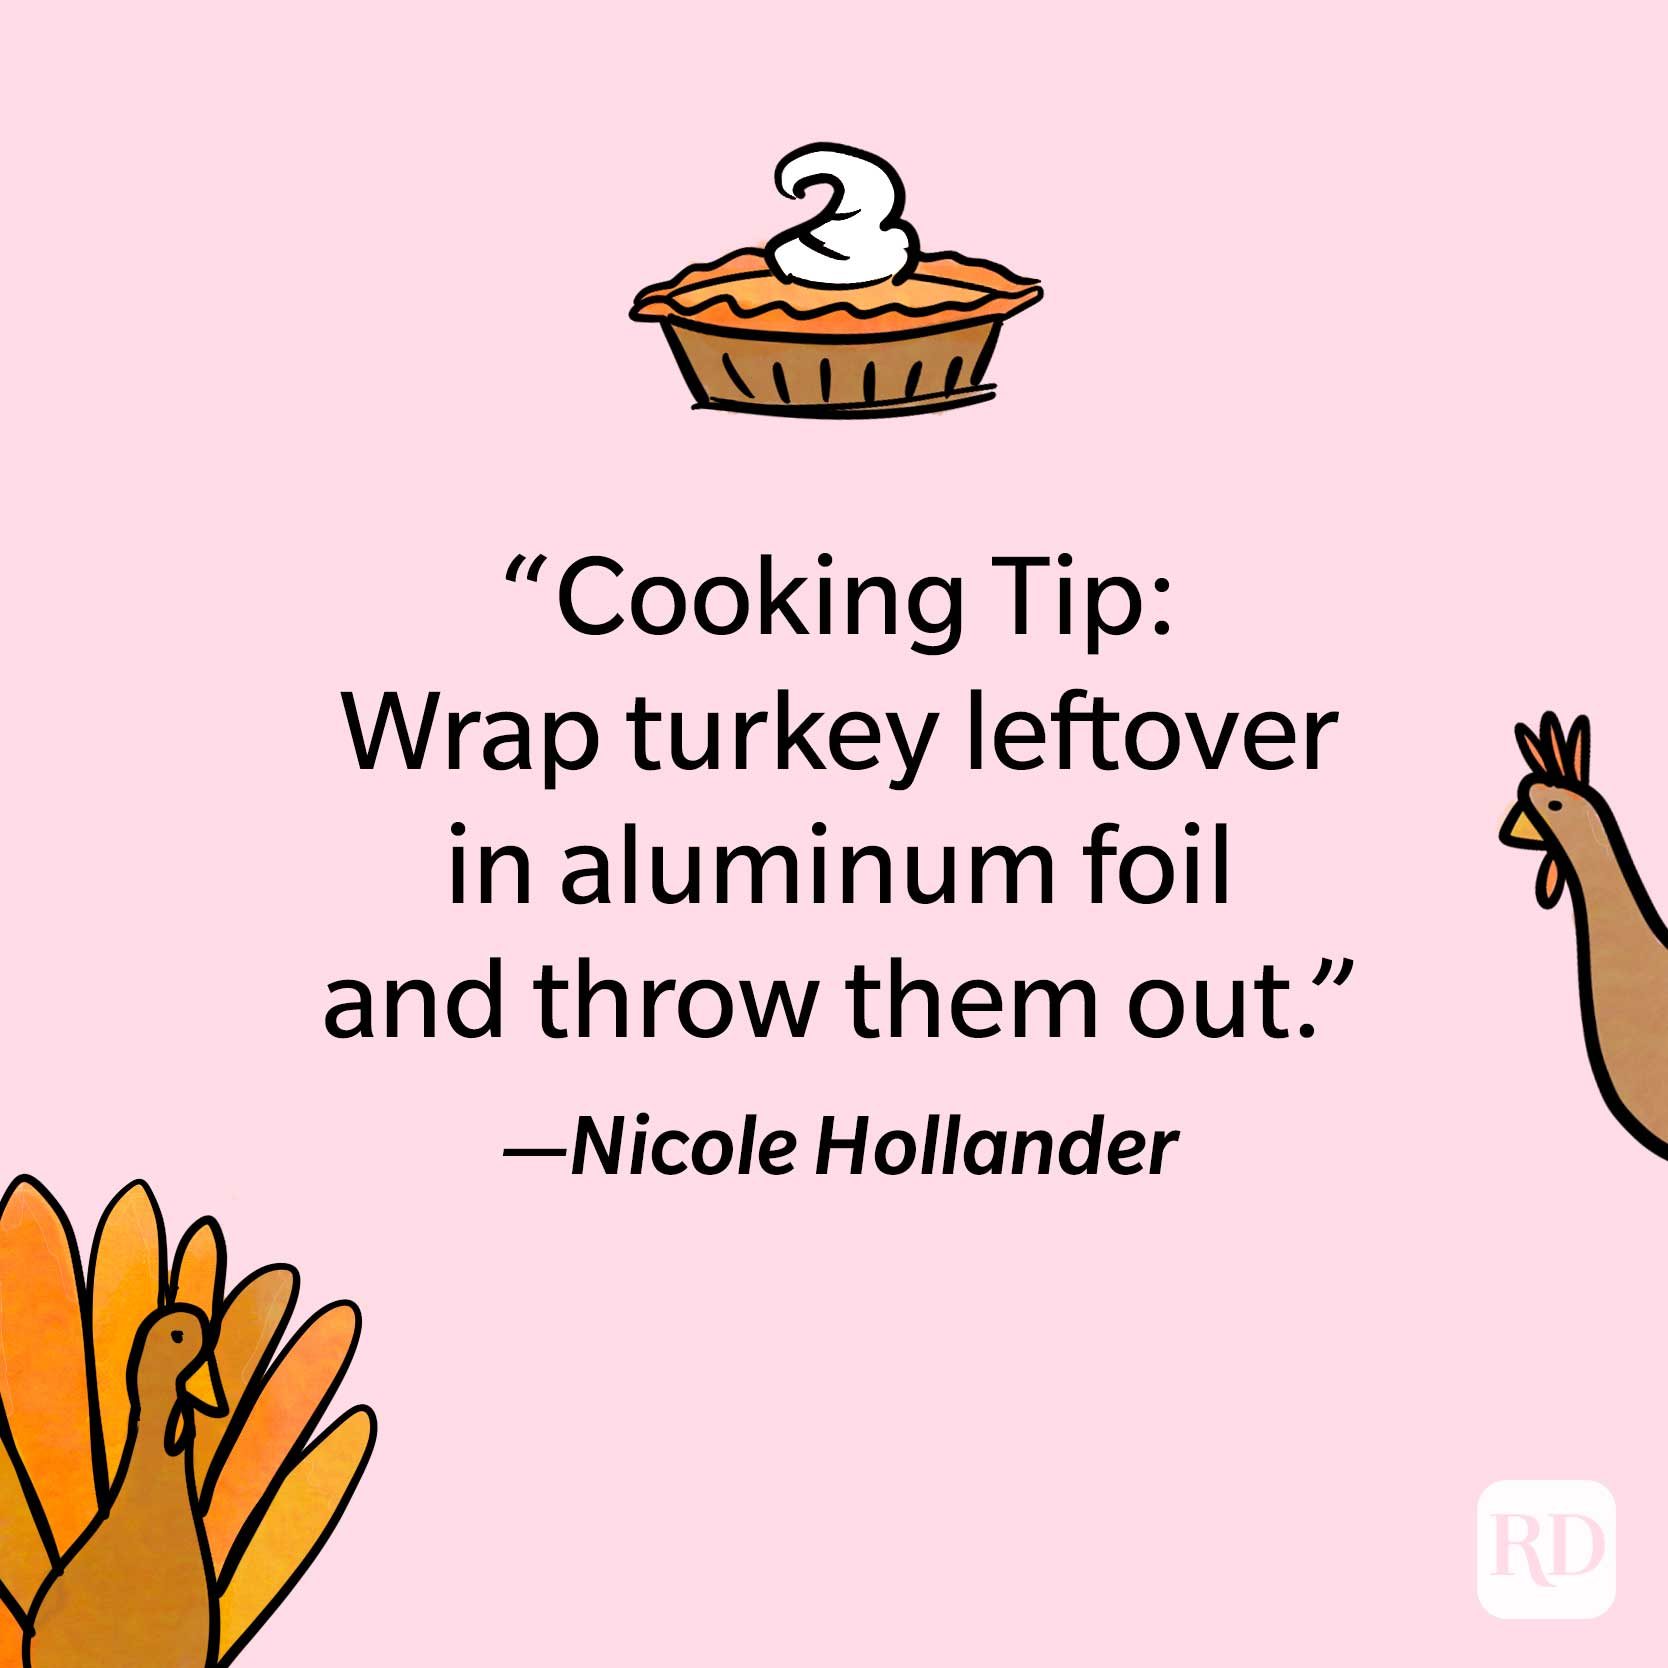 Funny Thanksgiving Quotes To Share At The Table Reader S Digest